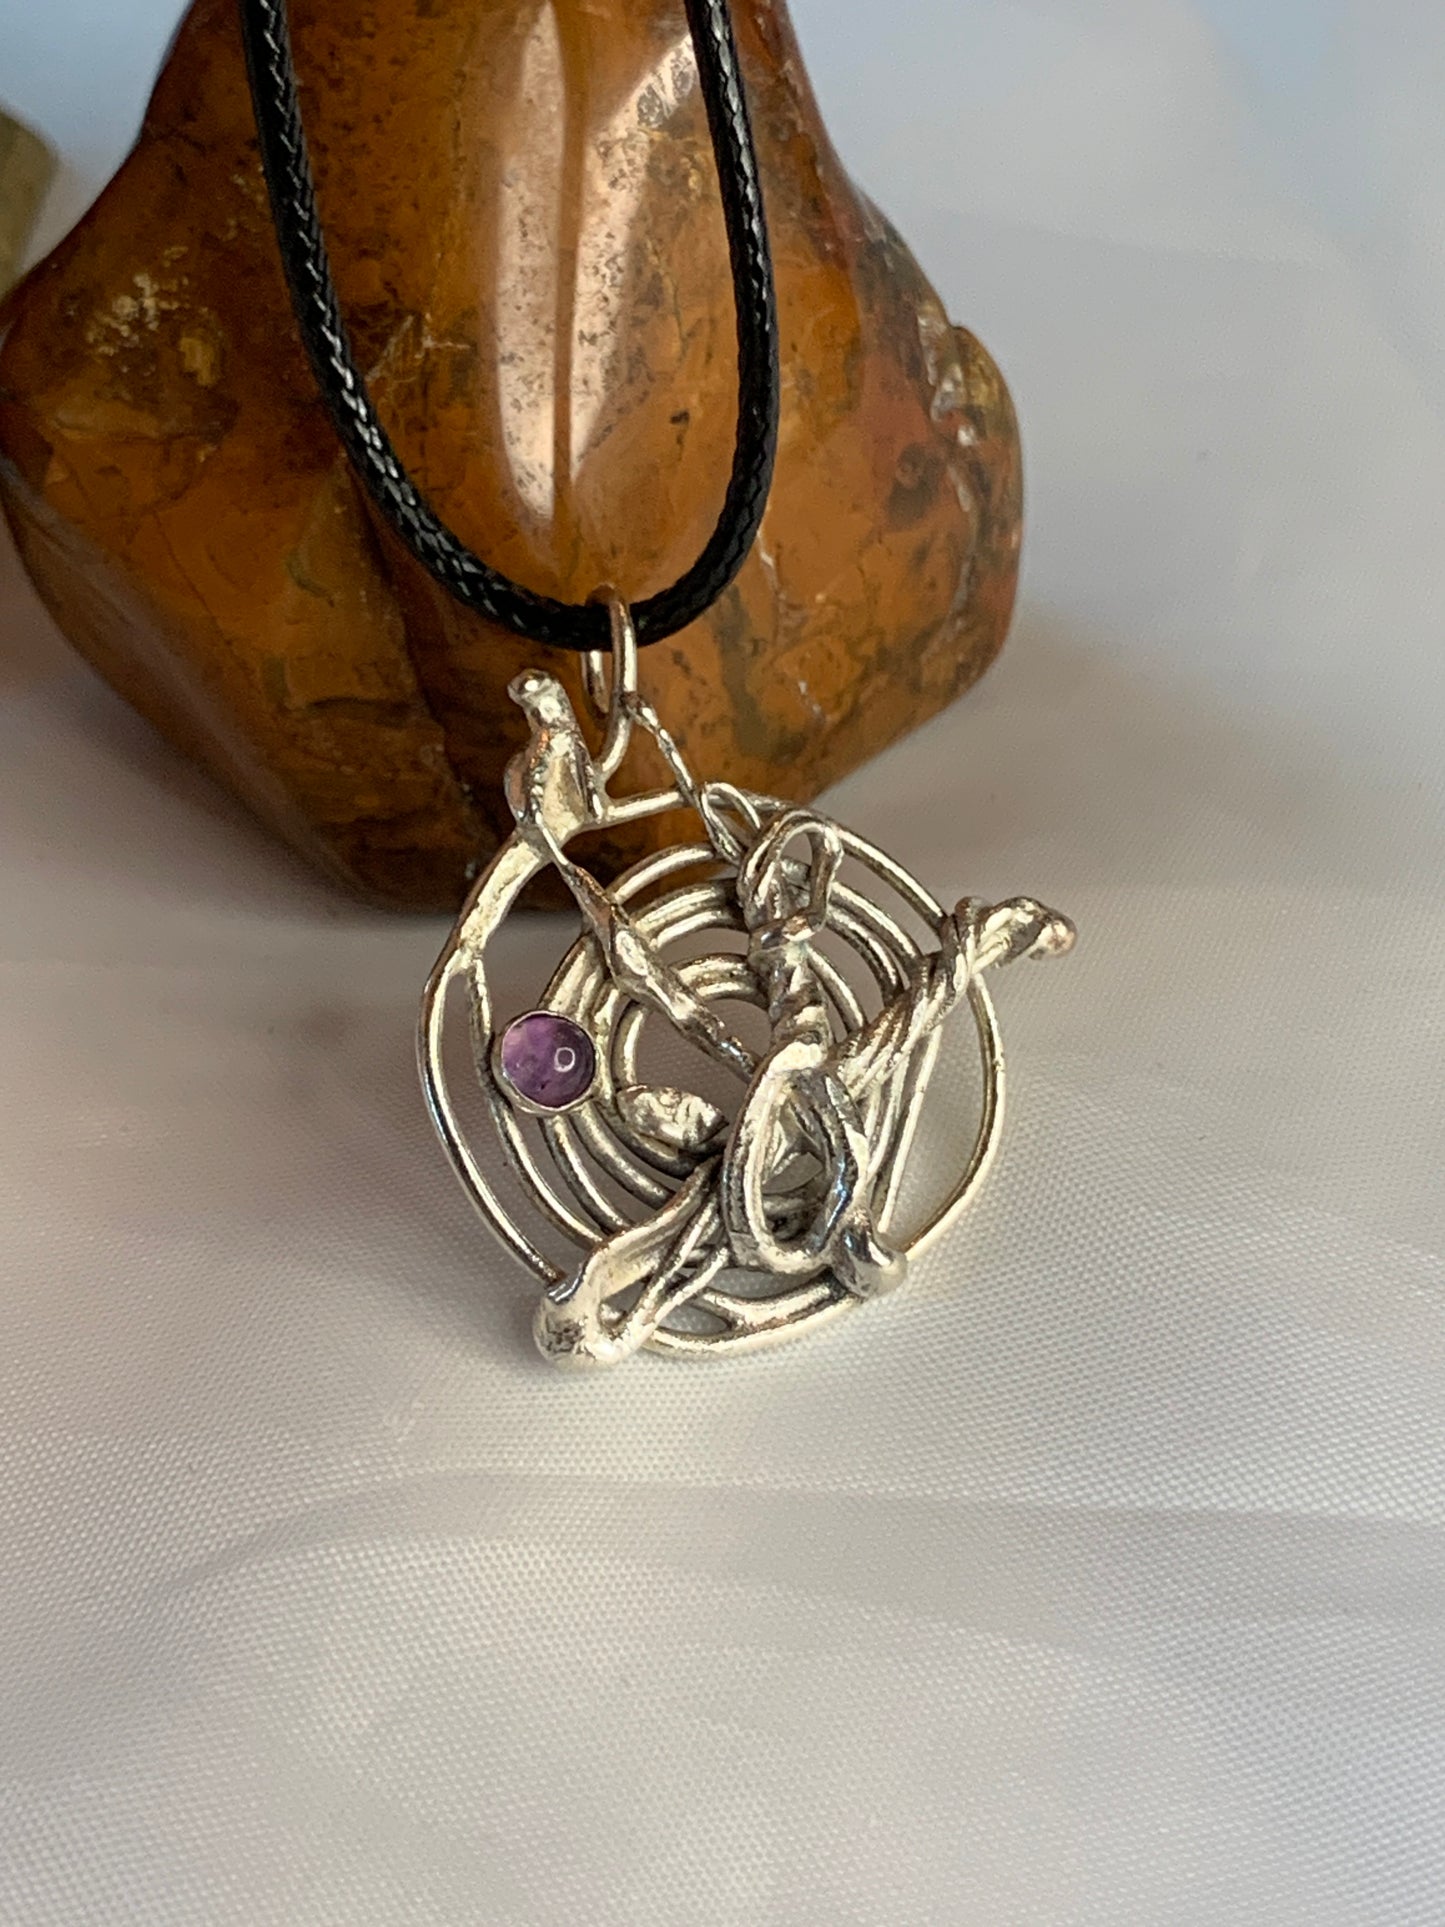 The pendant features an abstract fused spiral design, meticulously handcrafted from sterling silver, symbolizing creativity and individuality. At its center lies a luminous Amethyst gemstone, renowned for its calming and spiritual properties, enhancing intuition and inner peace.